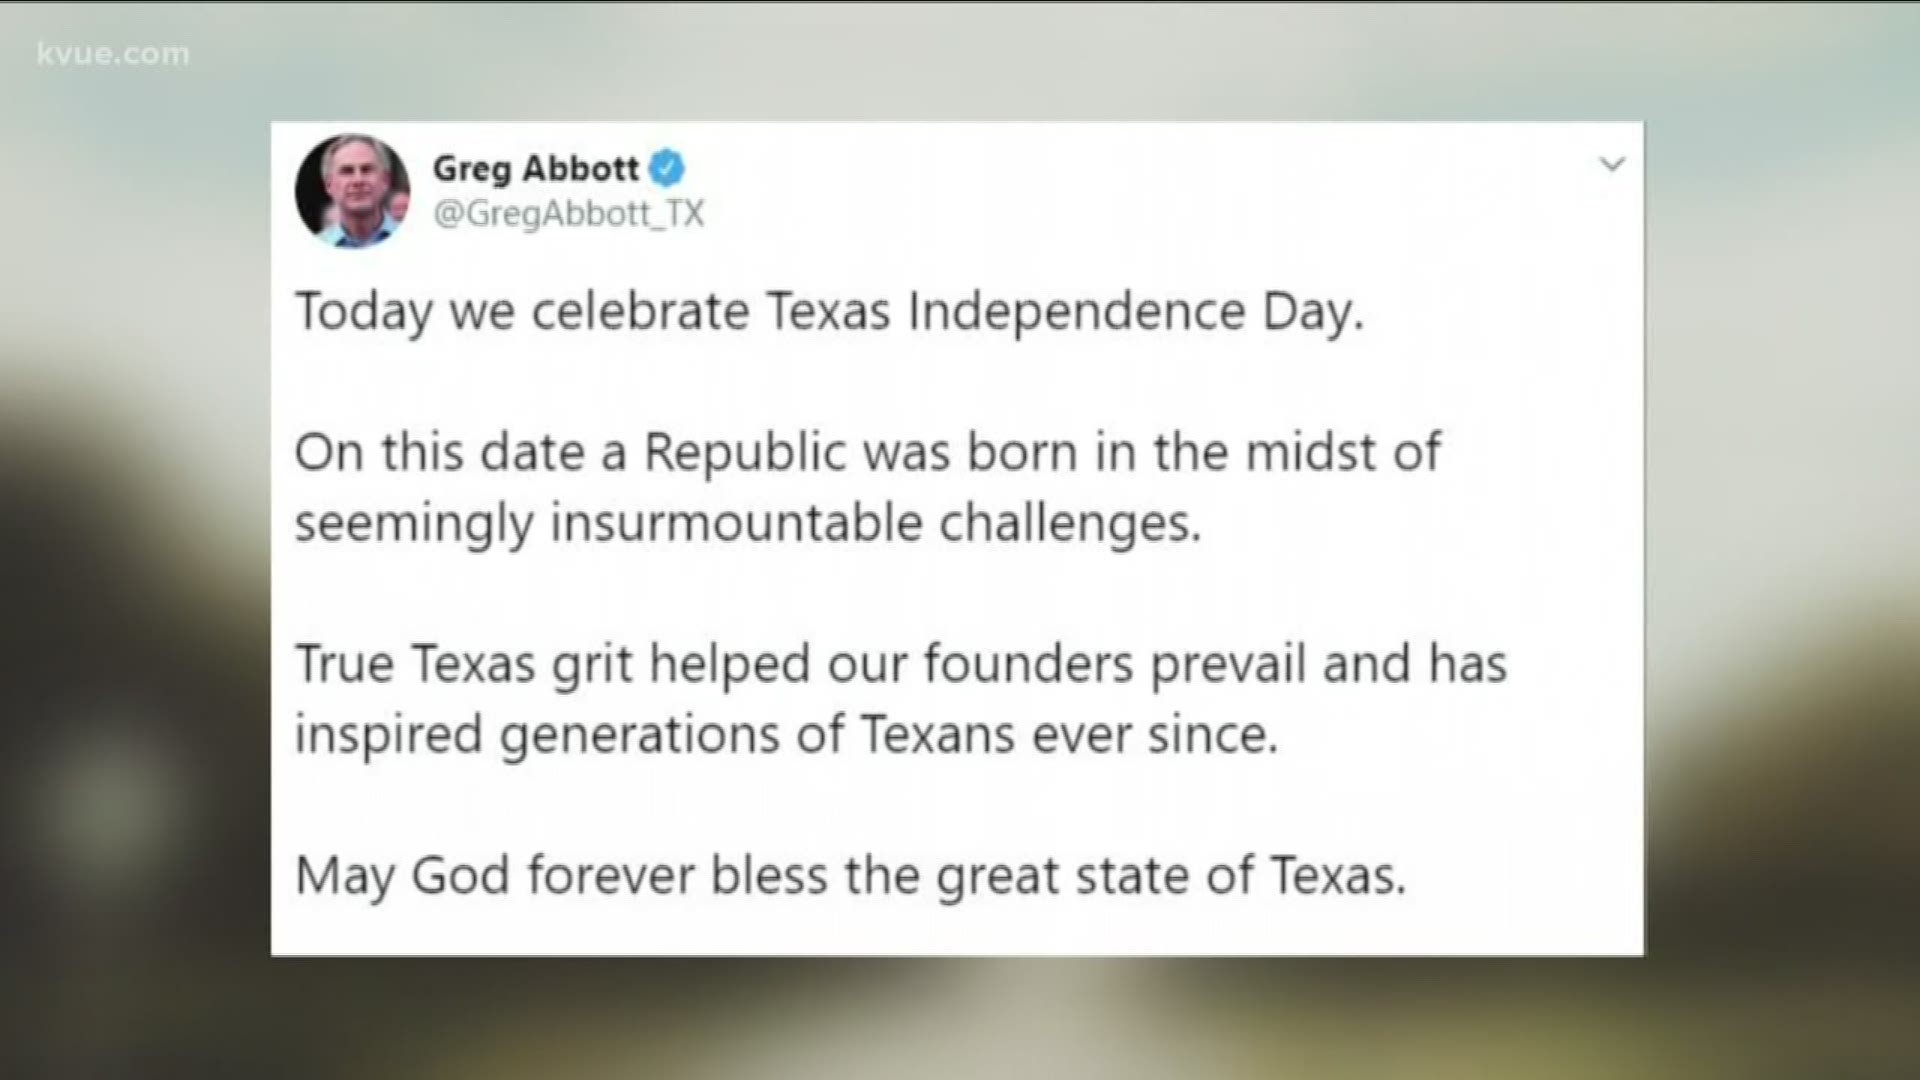 March 2 is Texas Independence Day.